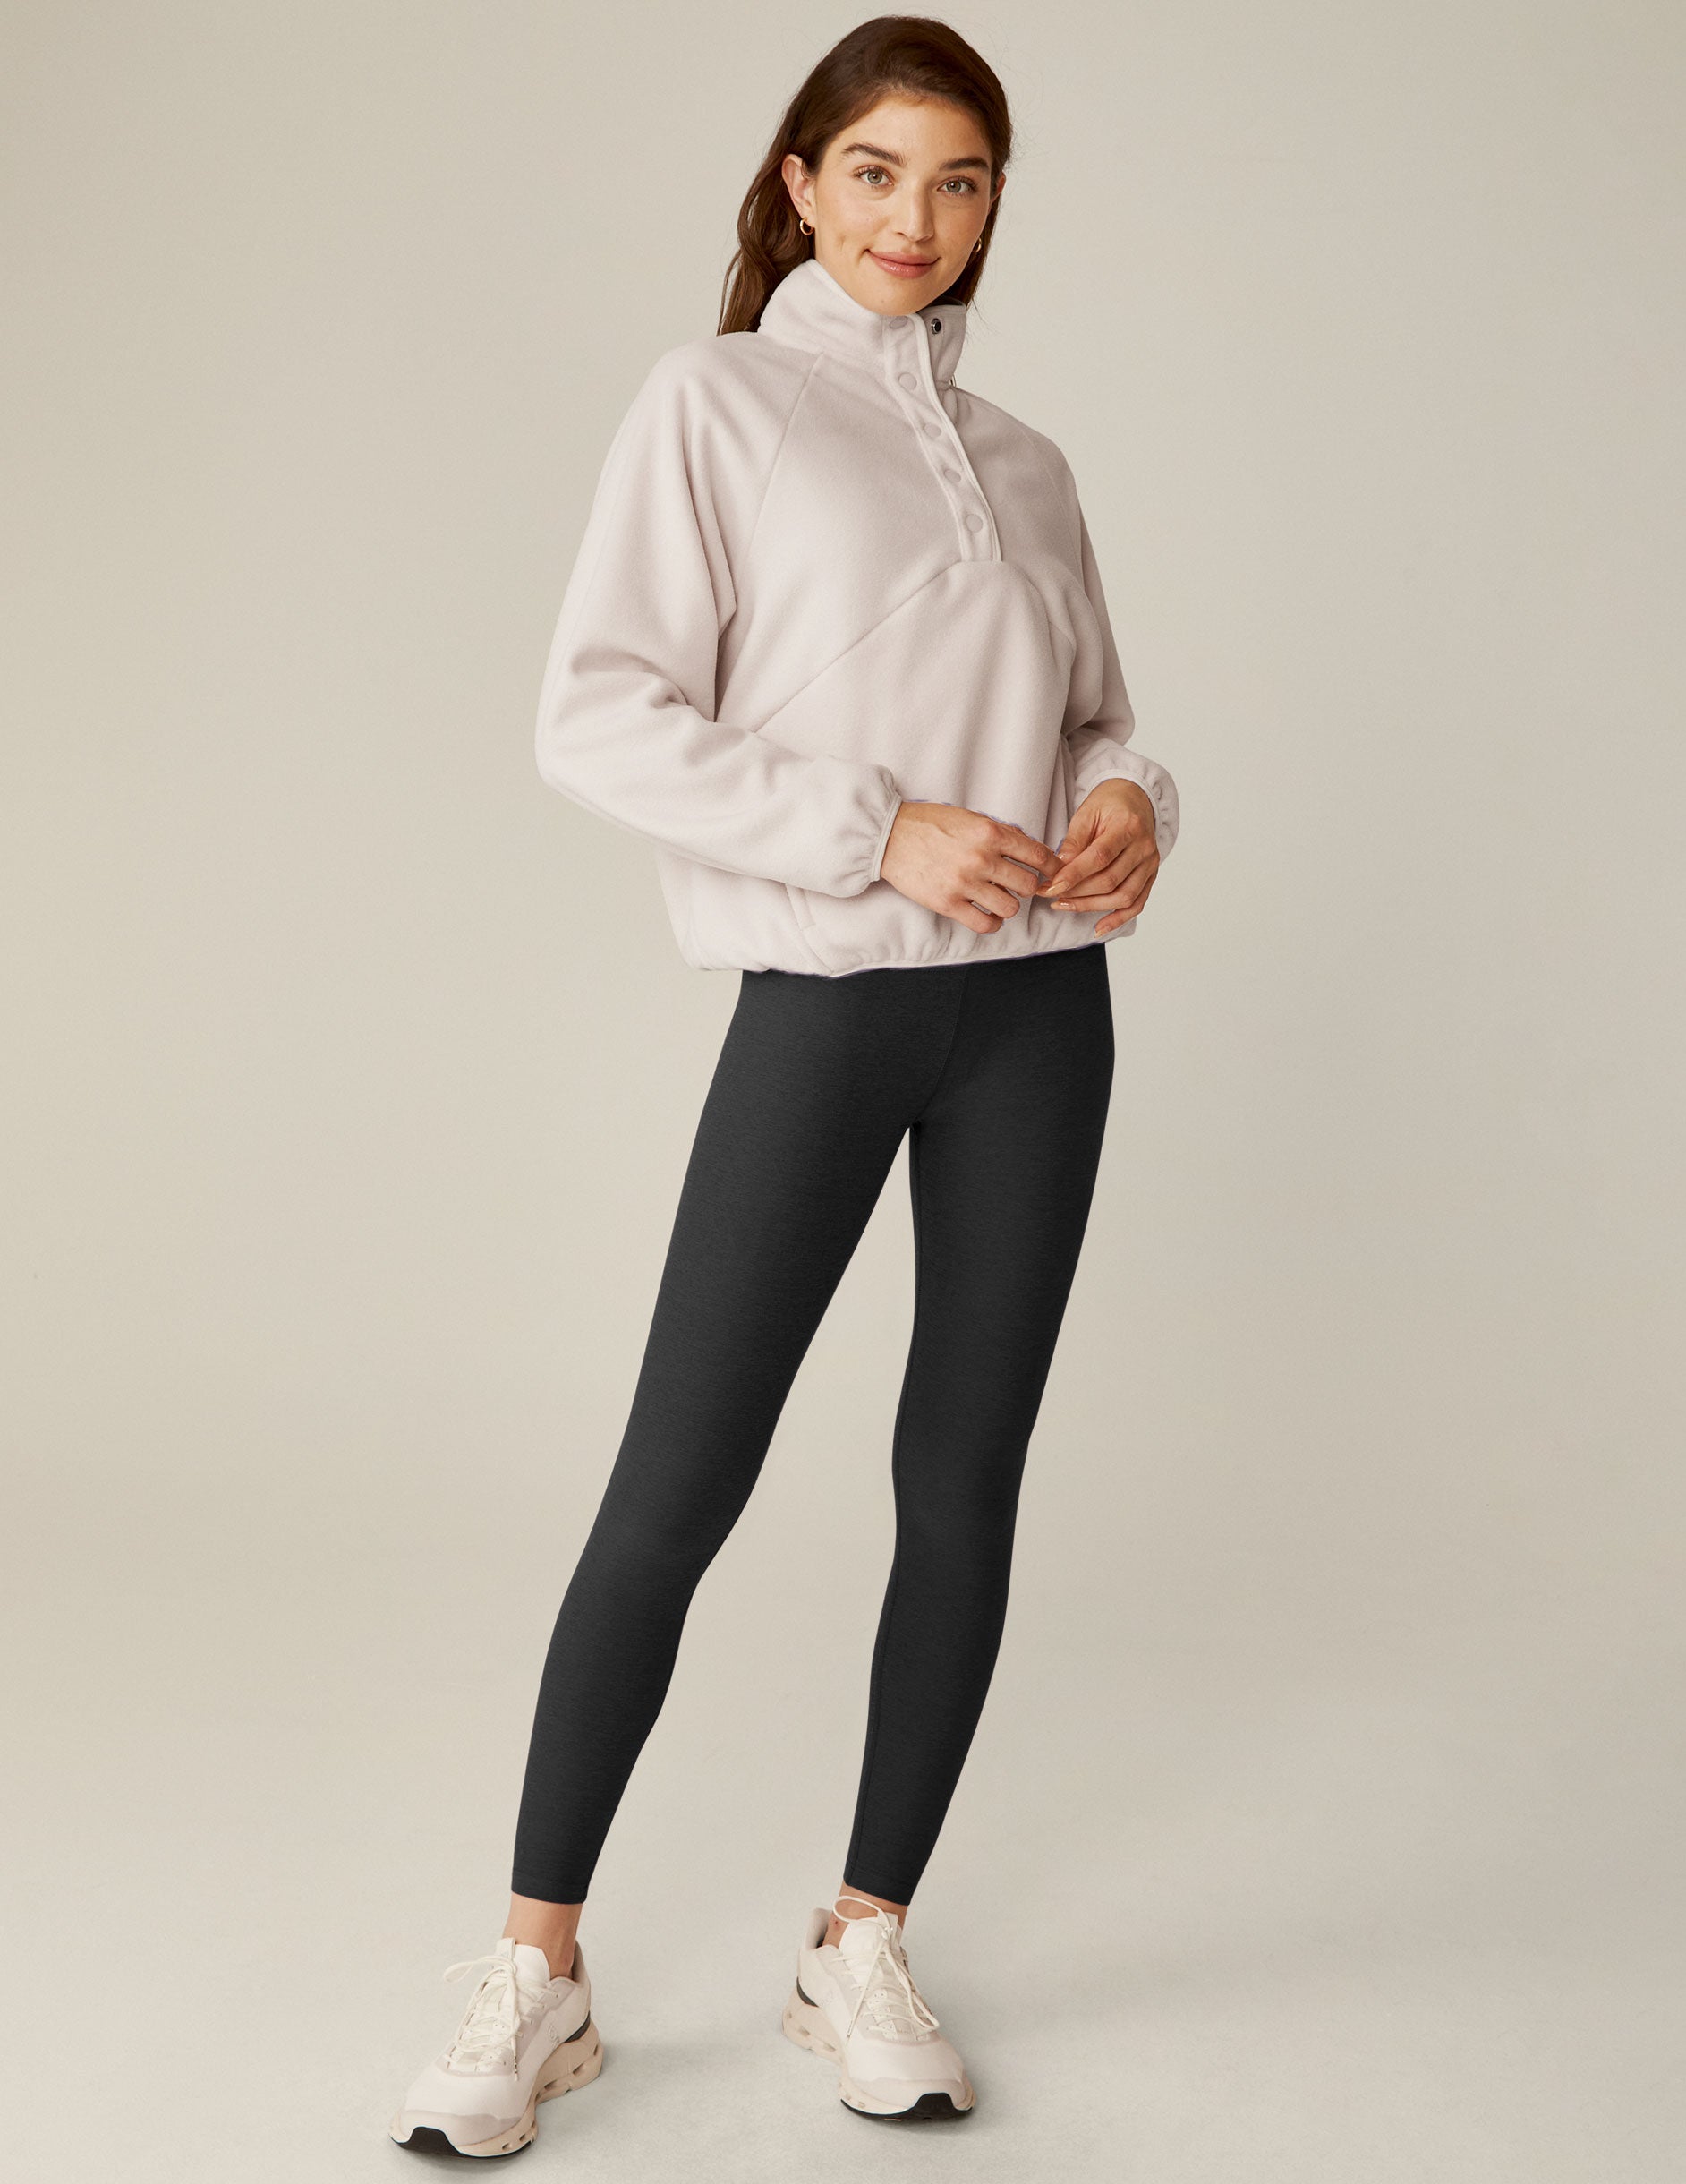 Tranquility Pullover Image 6